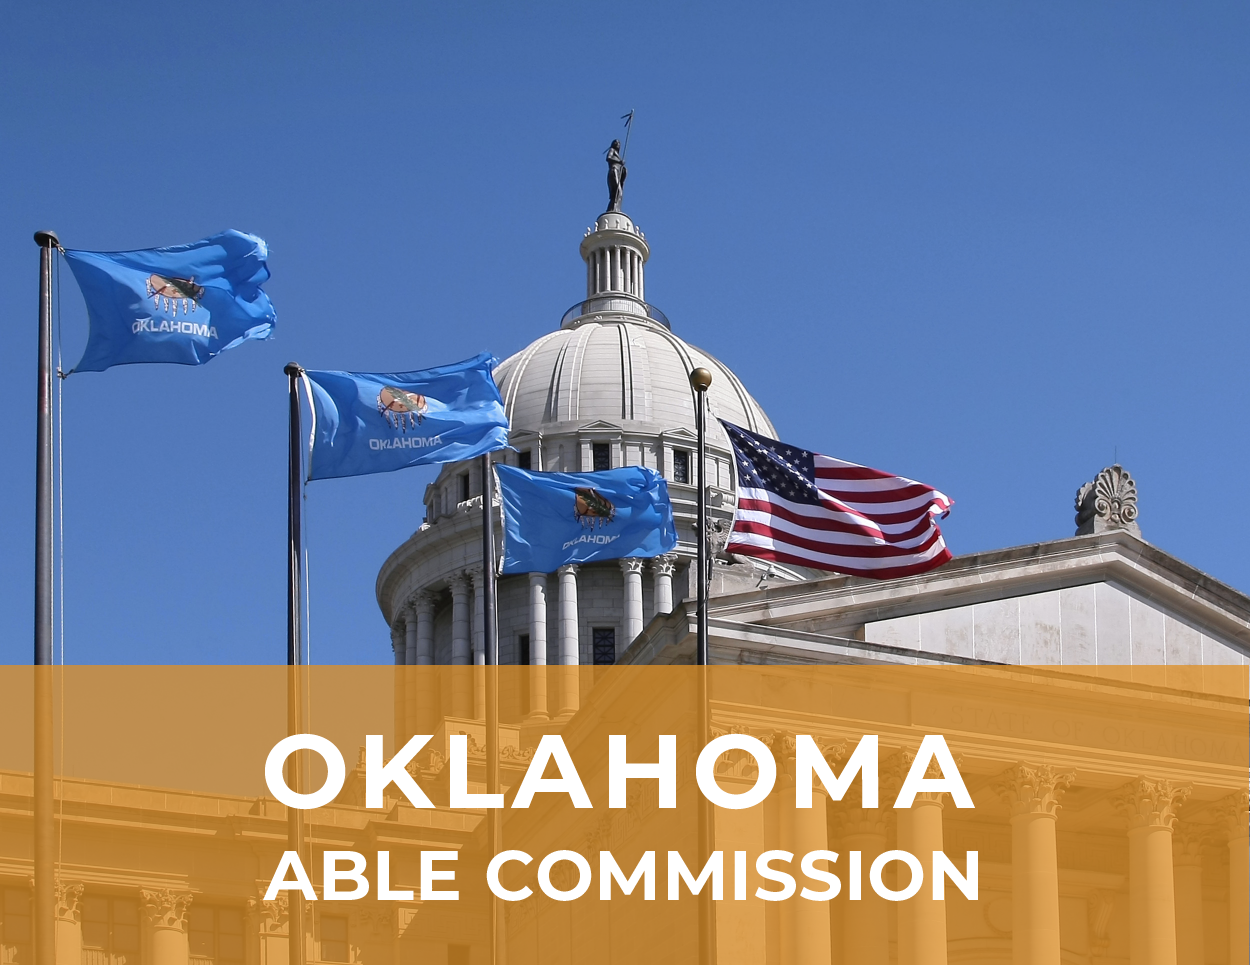 Oklahoma ABLE Commission Capitol & Flags